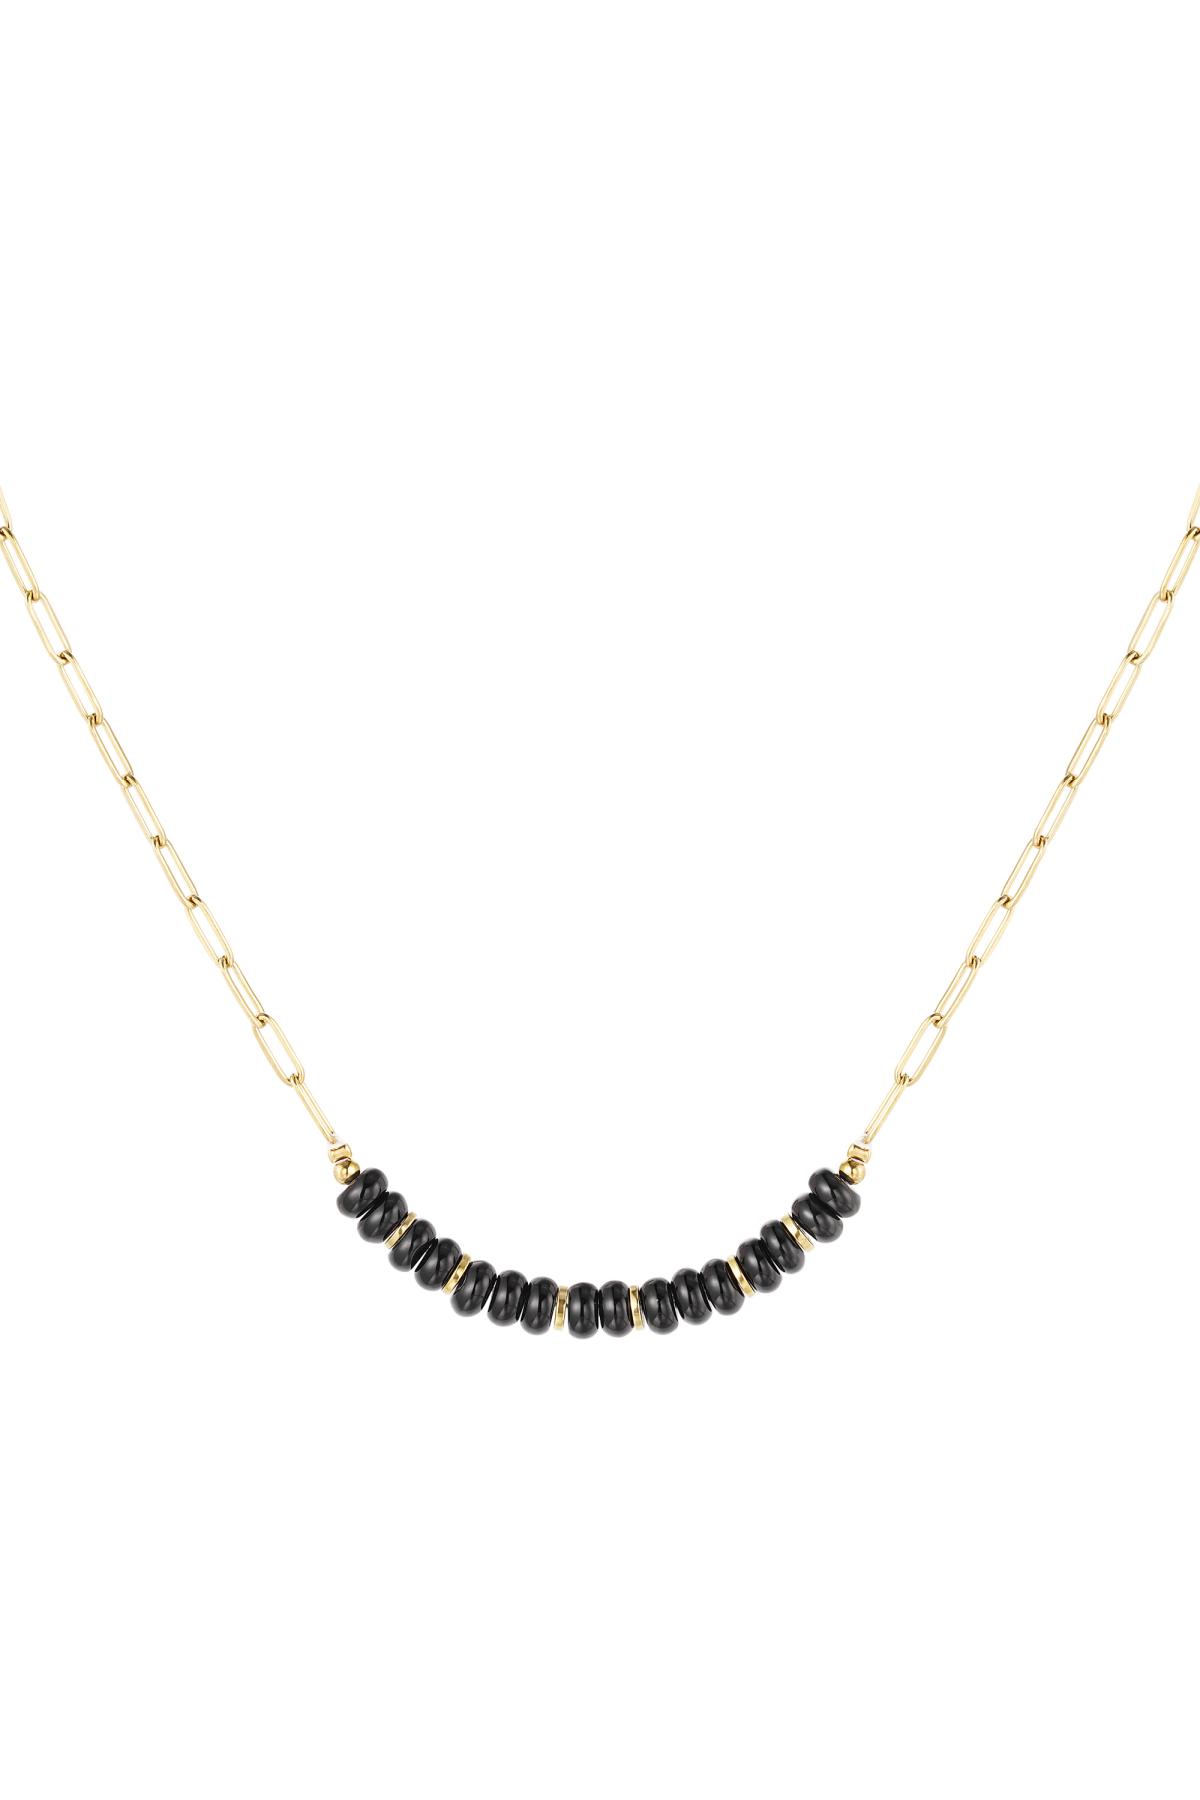 Link necklace with stone beads Black & Gold Stainless Steel h5 